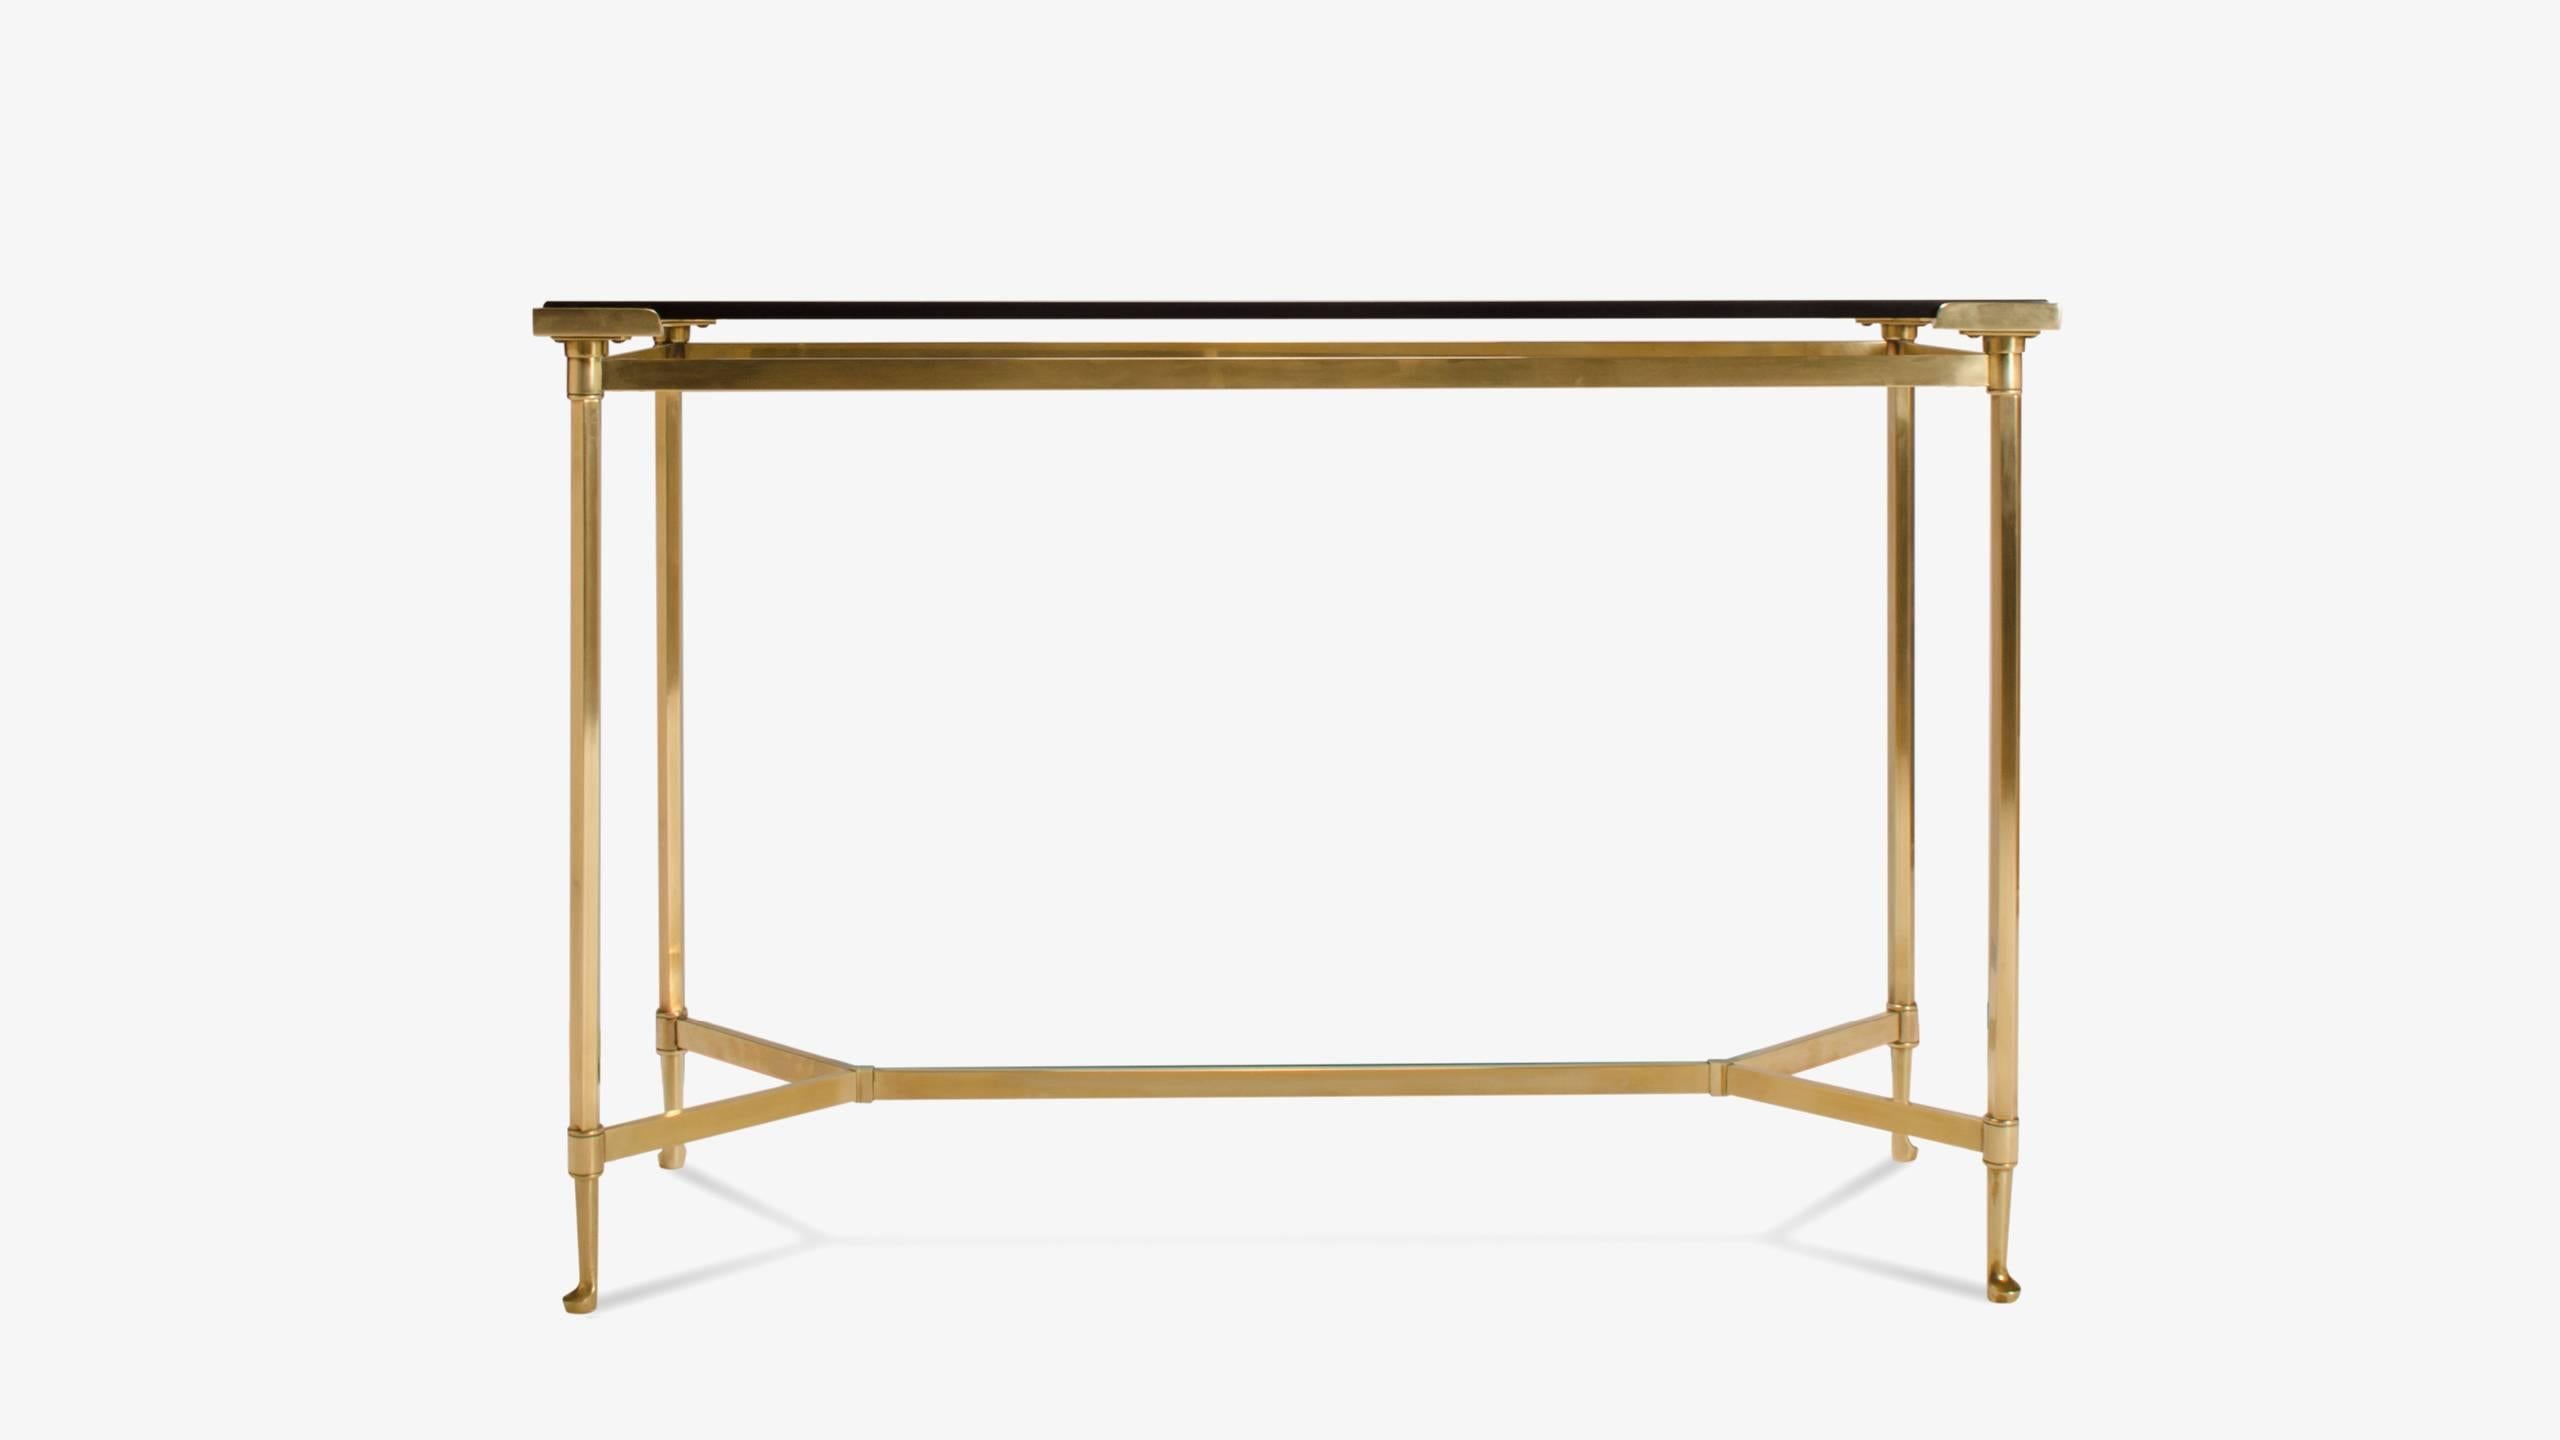 An impeccable piece of French design. This petite console elegantly utilizes superior materiality throughout its form. Solid brass accents; four feet and four corner supports, frame the entirety of the console. A minimal brass cross stretcher is an